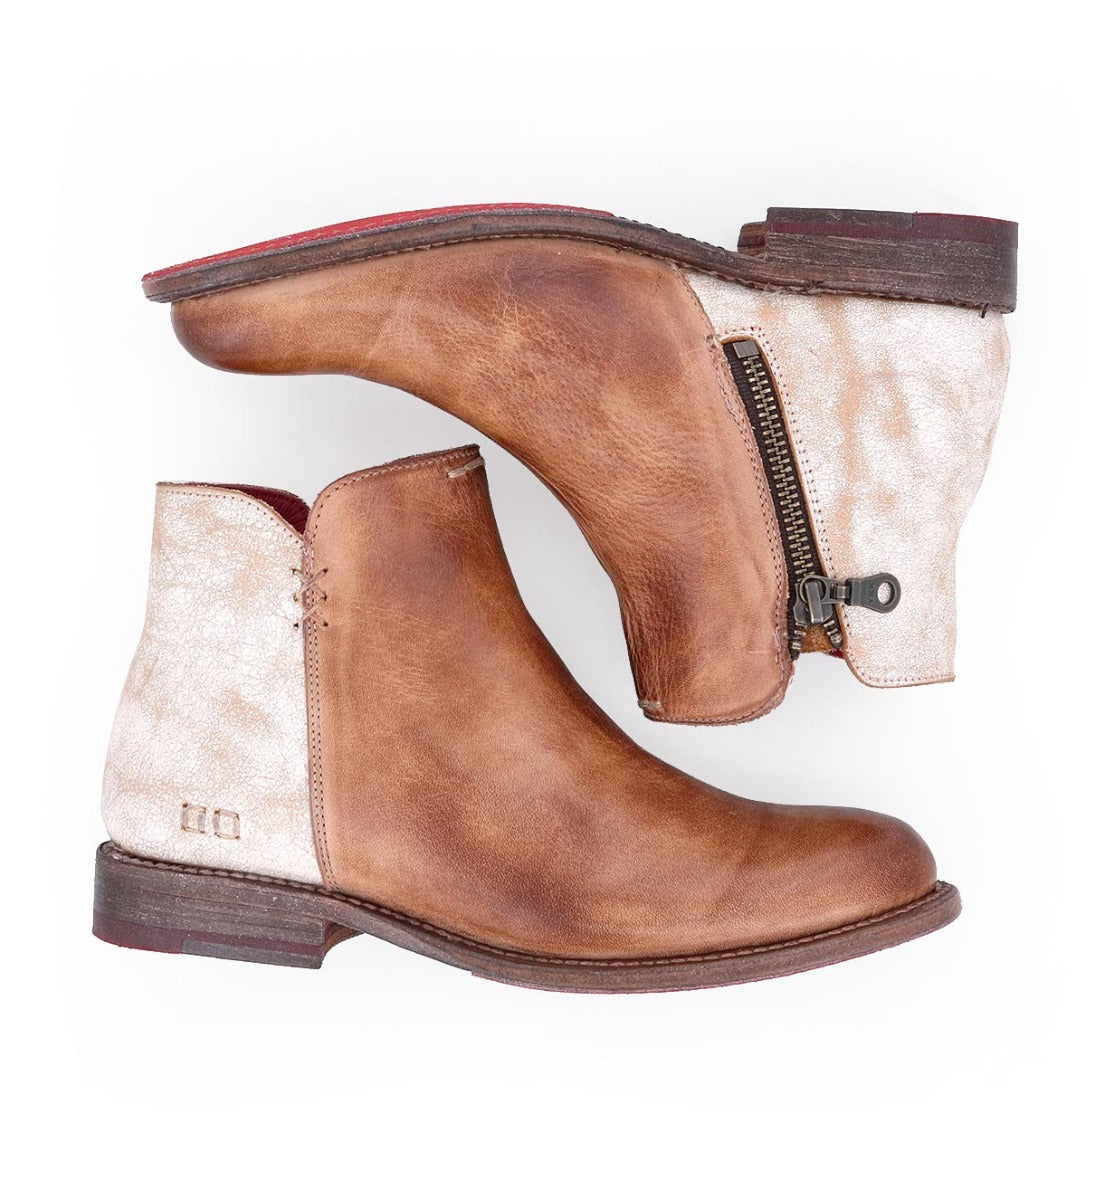 A pair of Yurisa women's chelsea boots by Bed Stu.